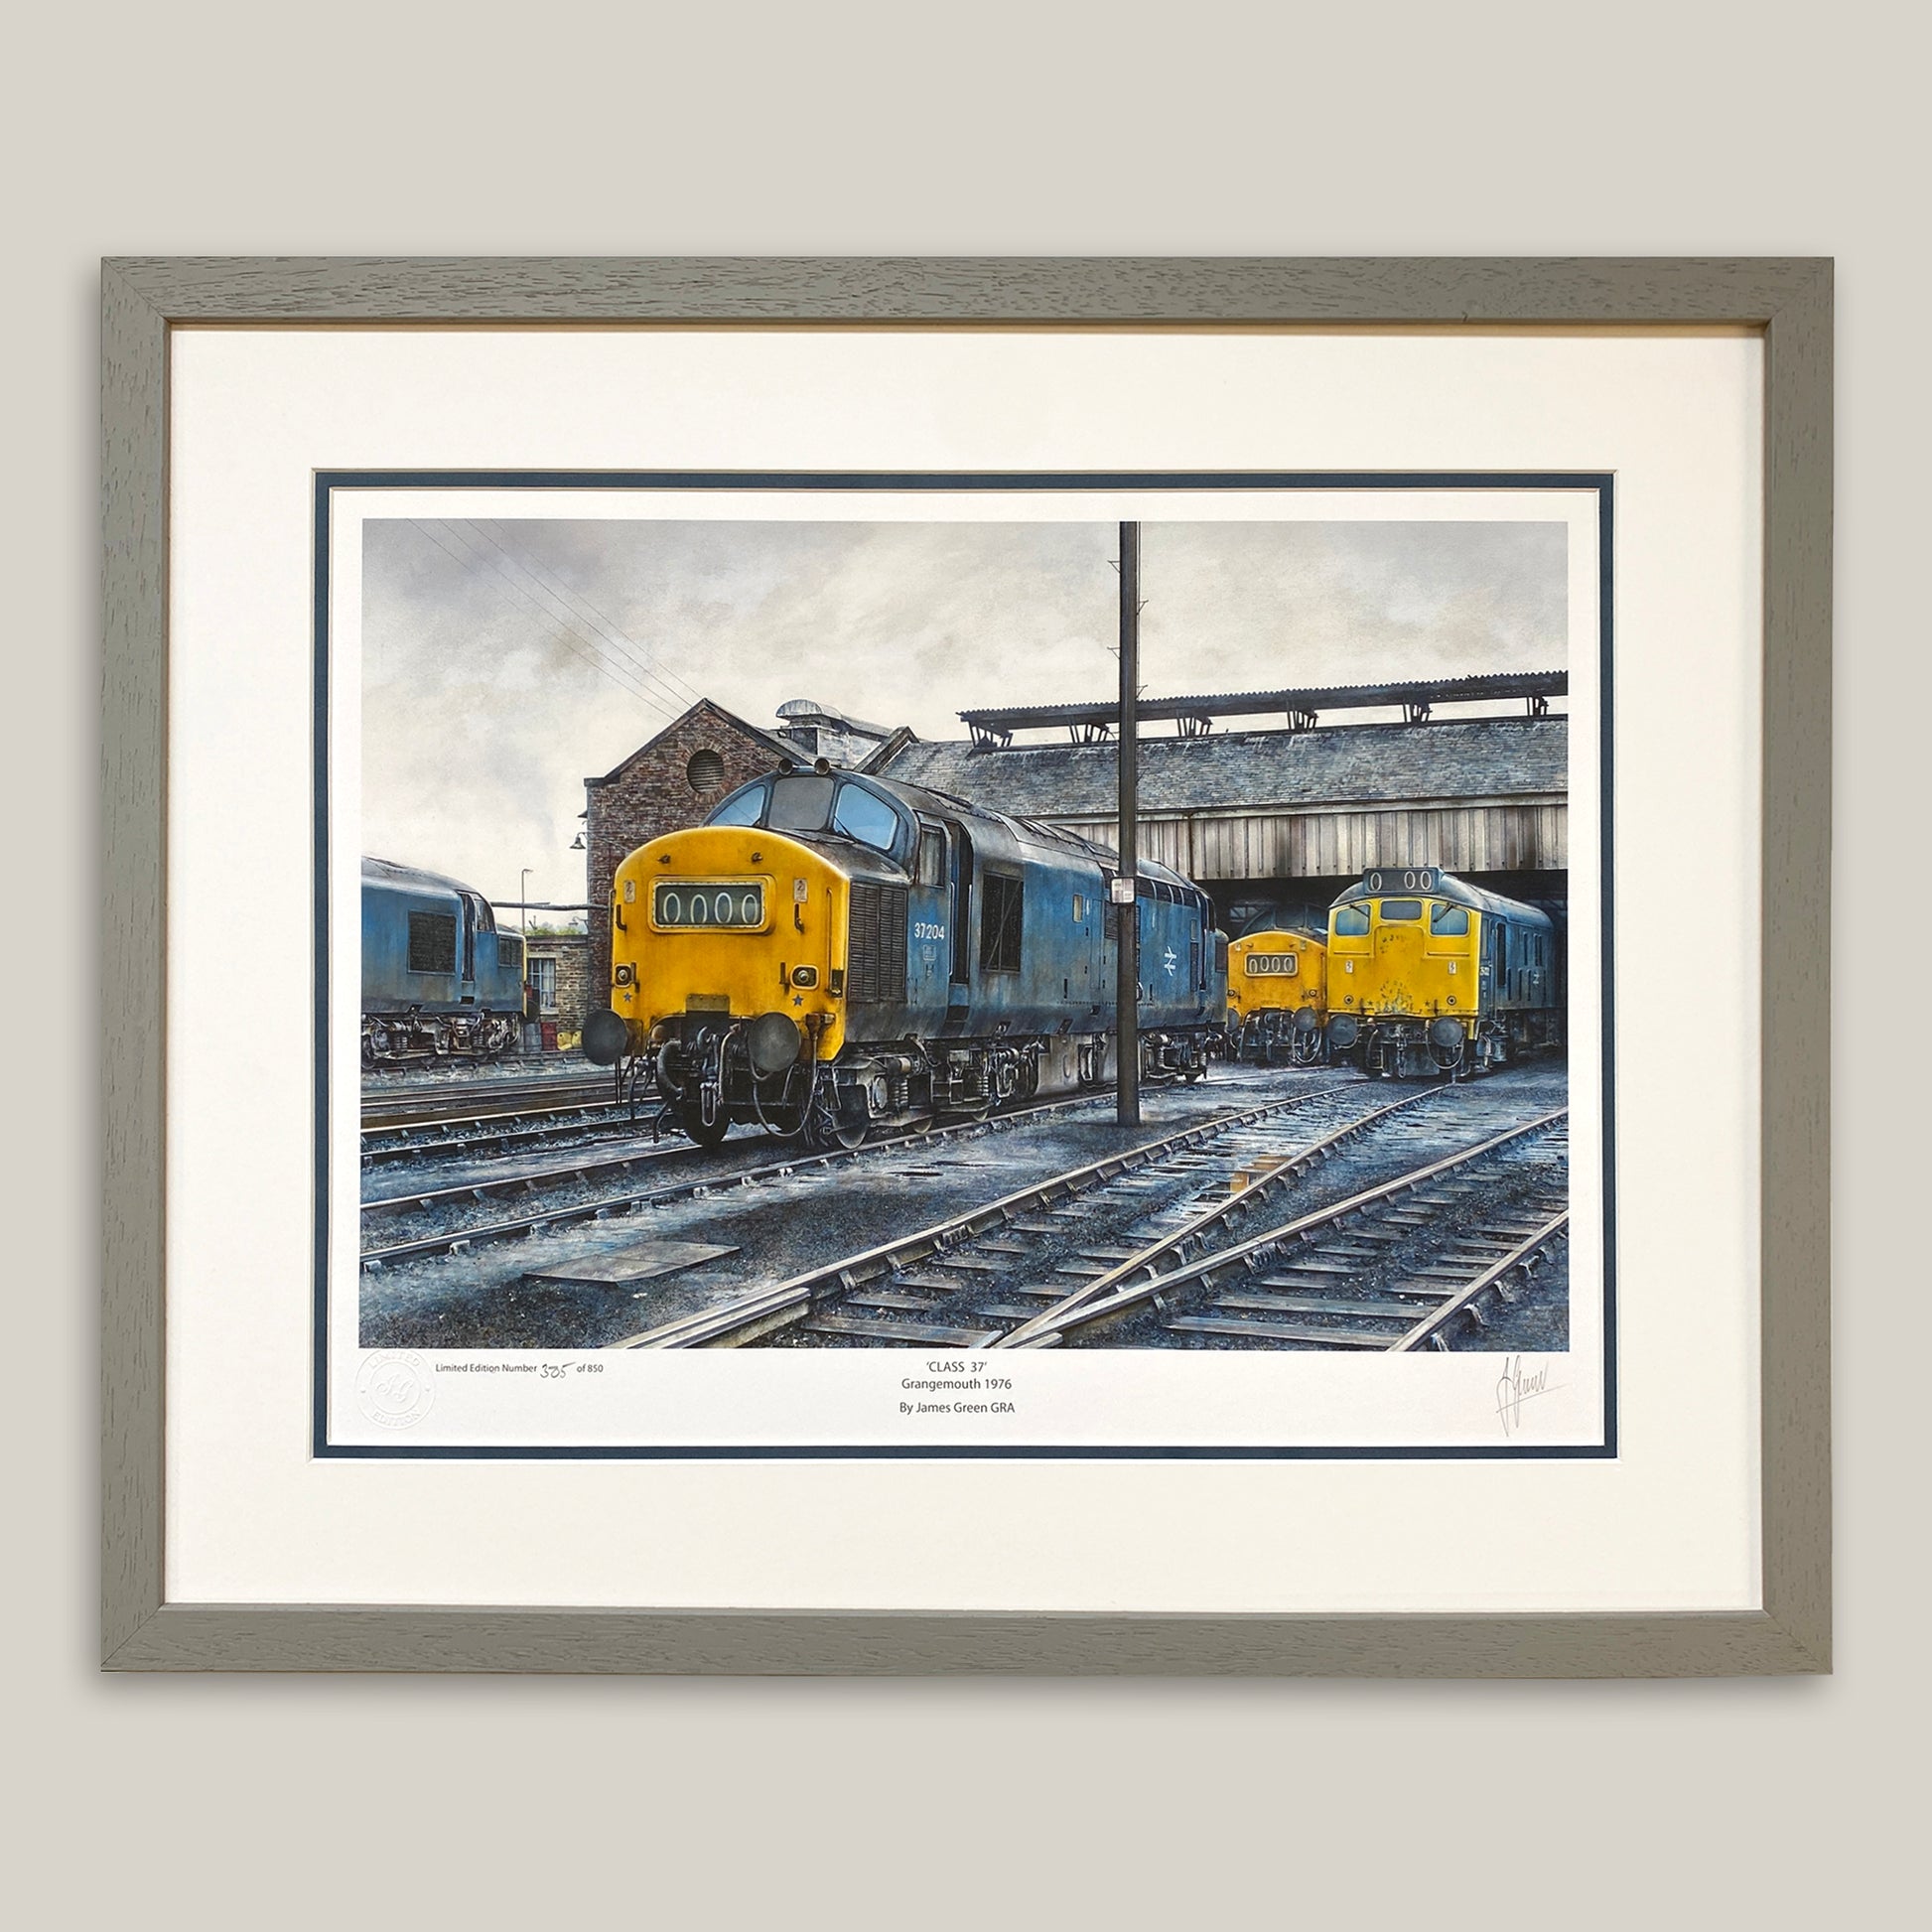 print of class 37 engines by railway artist James Green in a grey frame